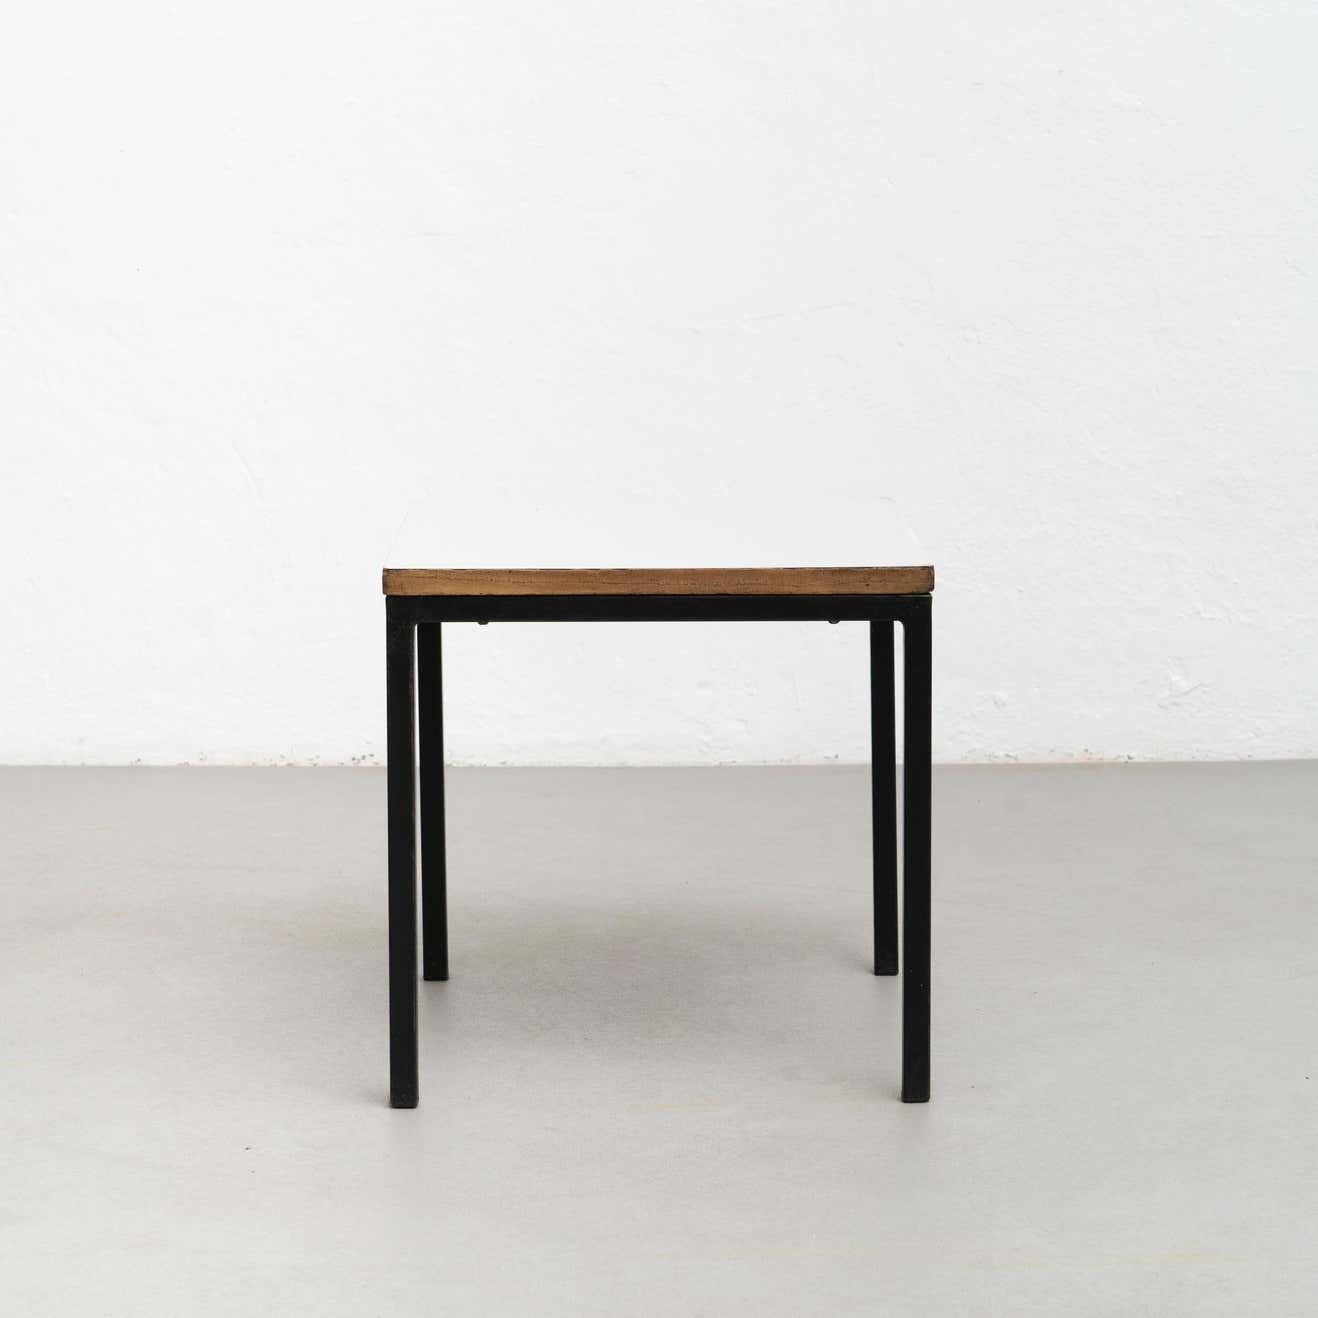 Table designed by Charlotte Perriand, circa 1950 from Cité Cansado, Mauritania, Africa. 

Painted steel, plastic laminate-covered wood.

Measures: 74.3 x 80 x 80 cm

In good original condition, with minor wear consistent with age and use,